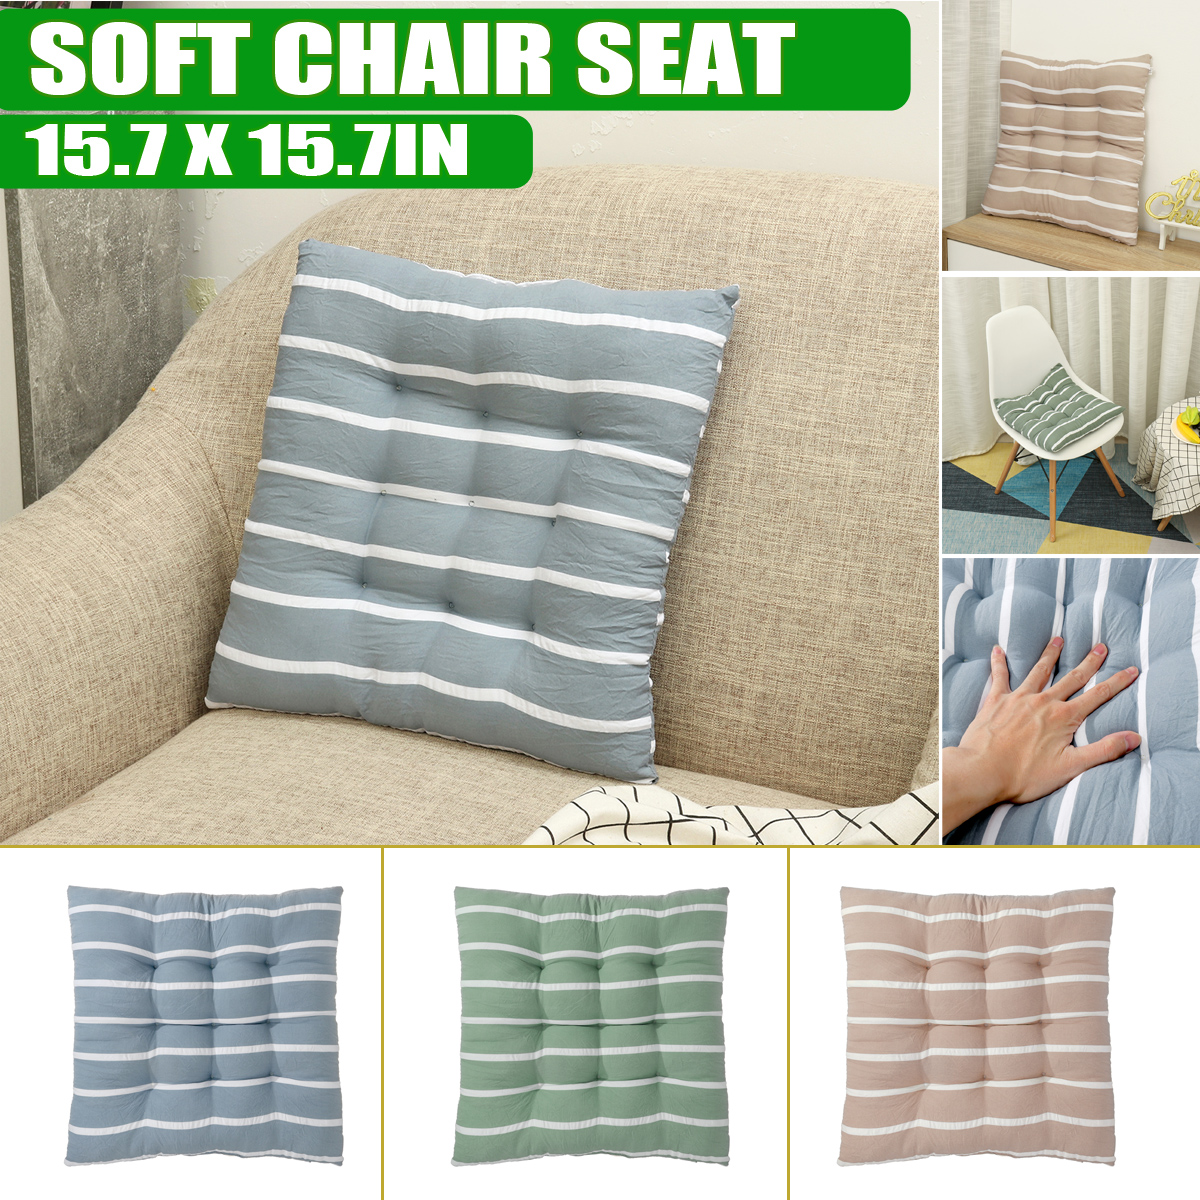 Soft Chair Seat Cushions With Tie on Dinning Room Kitchen Indoor Outdoor Garden